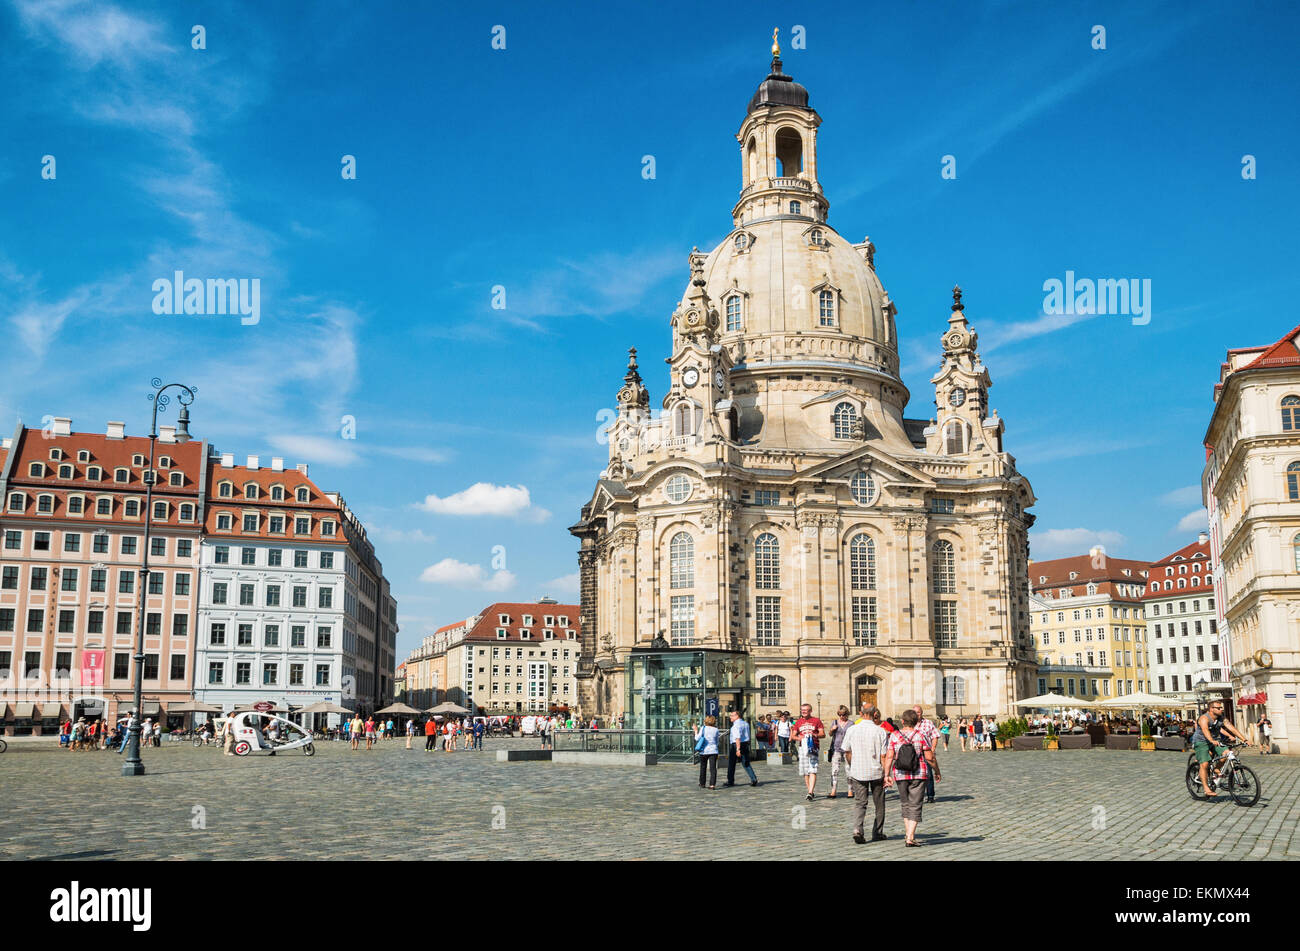 Dresden Frauenkirche, lady of our church in Dresden Neumarkt, Germany. Stock Photo